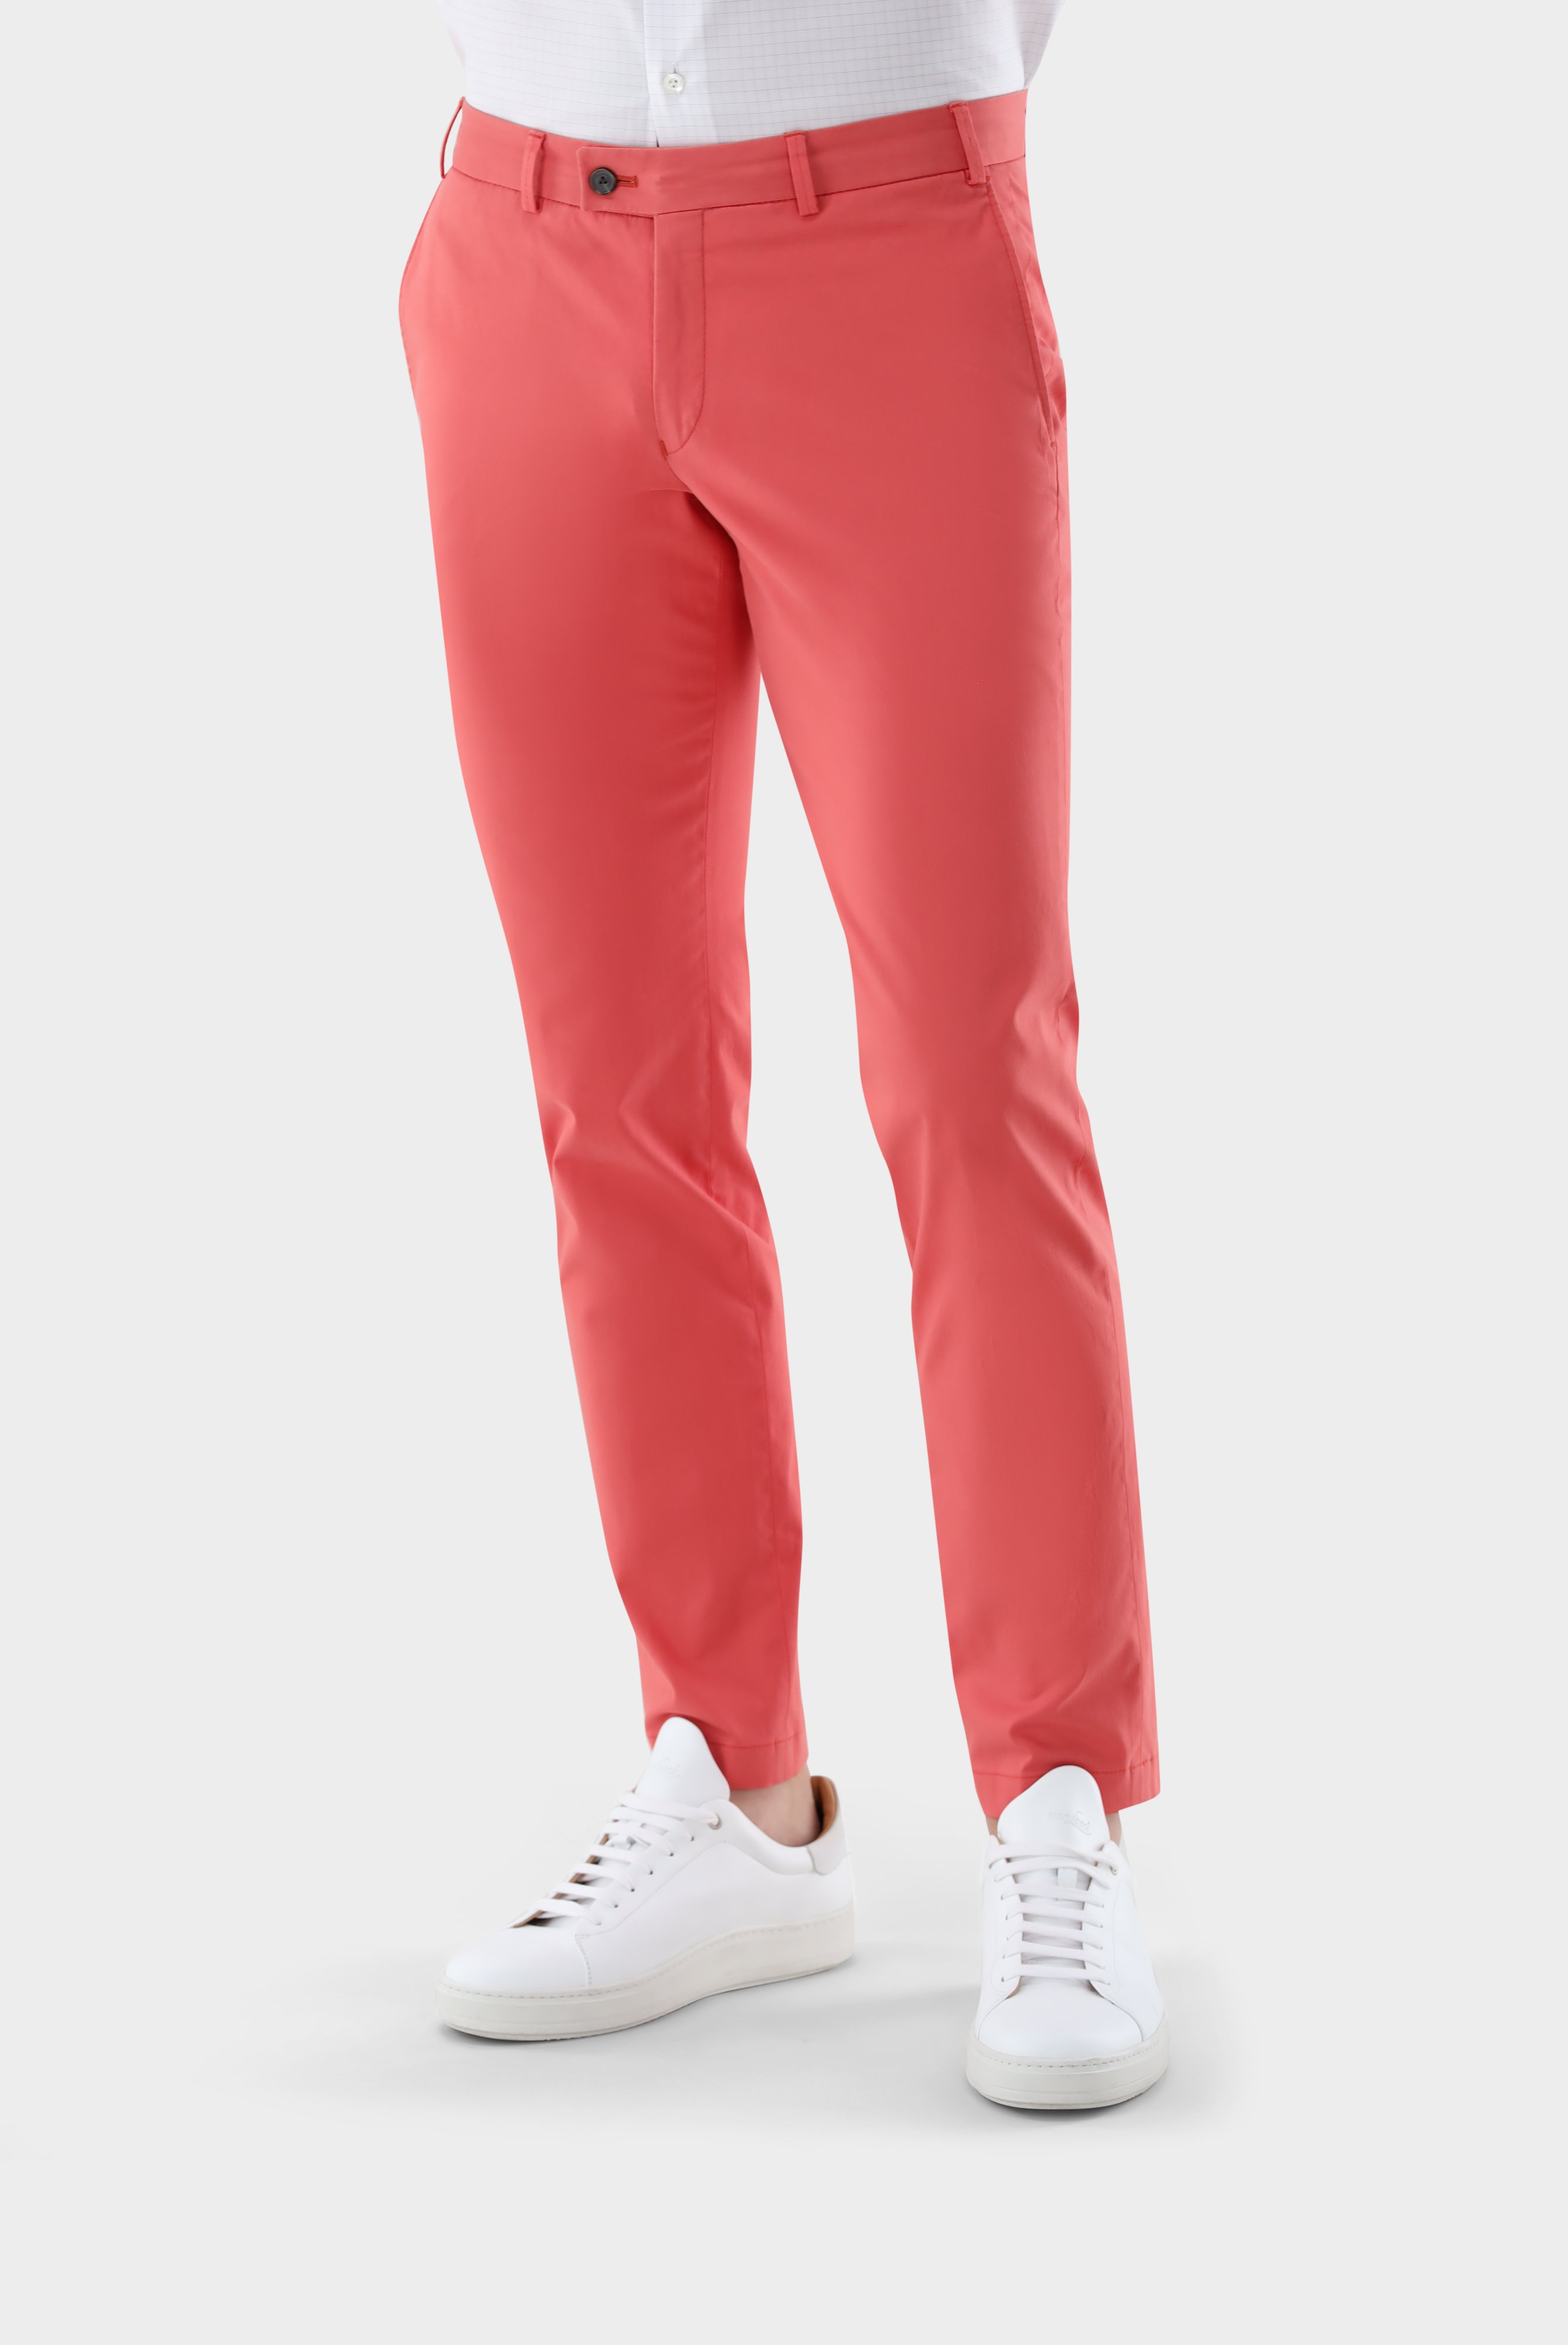 Jeans & Trousers+Cotton with Stretch Tapered Chinos+80.7858..J00151.440.46